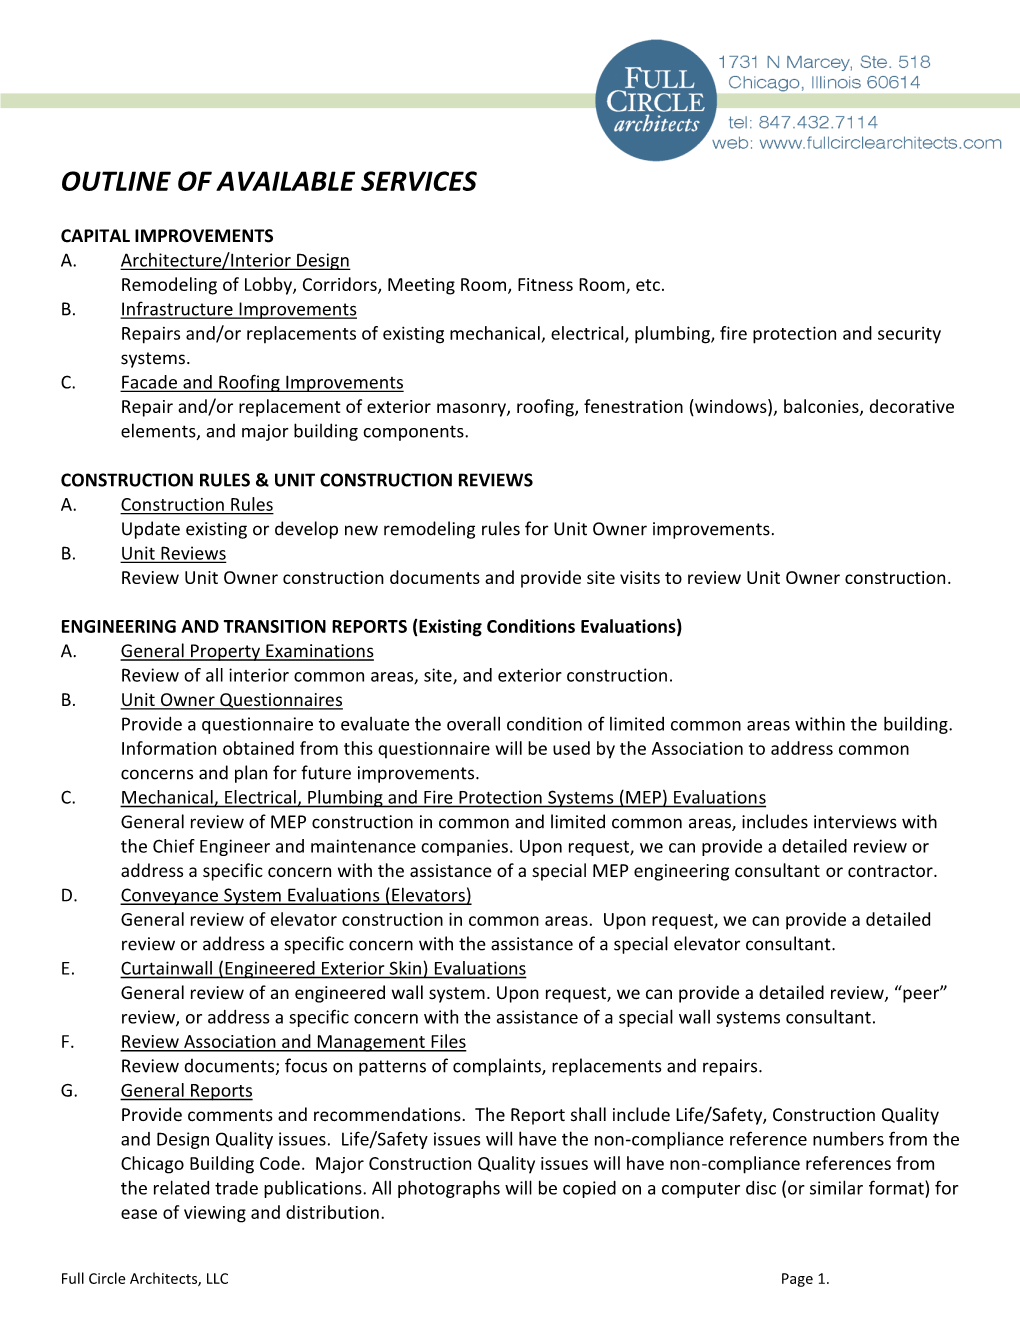 Outline of Available Services